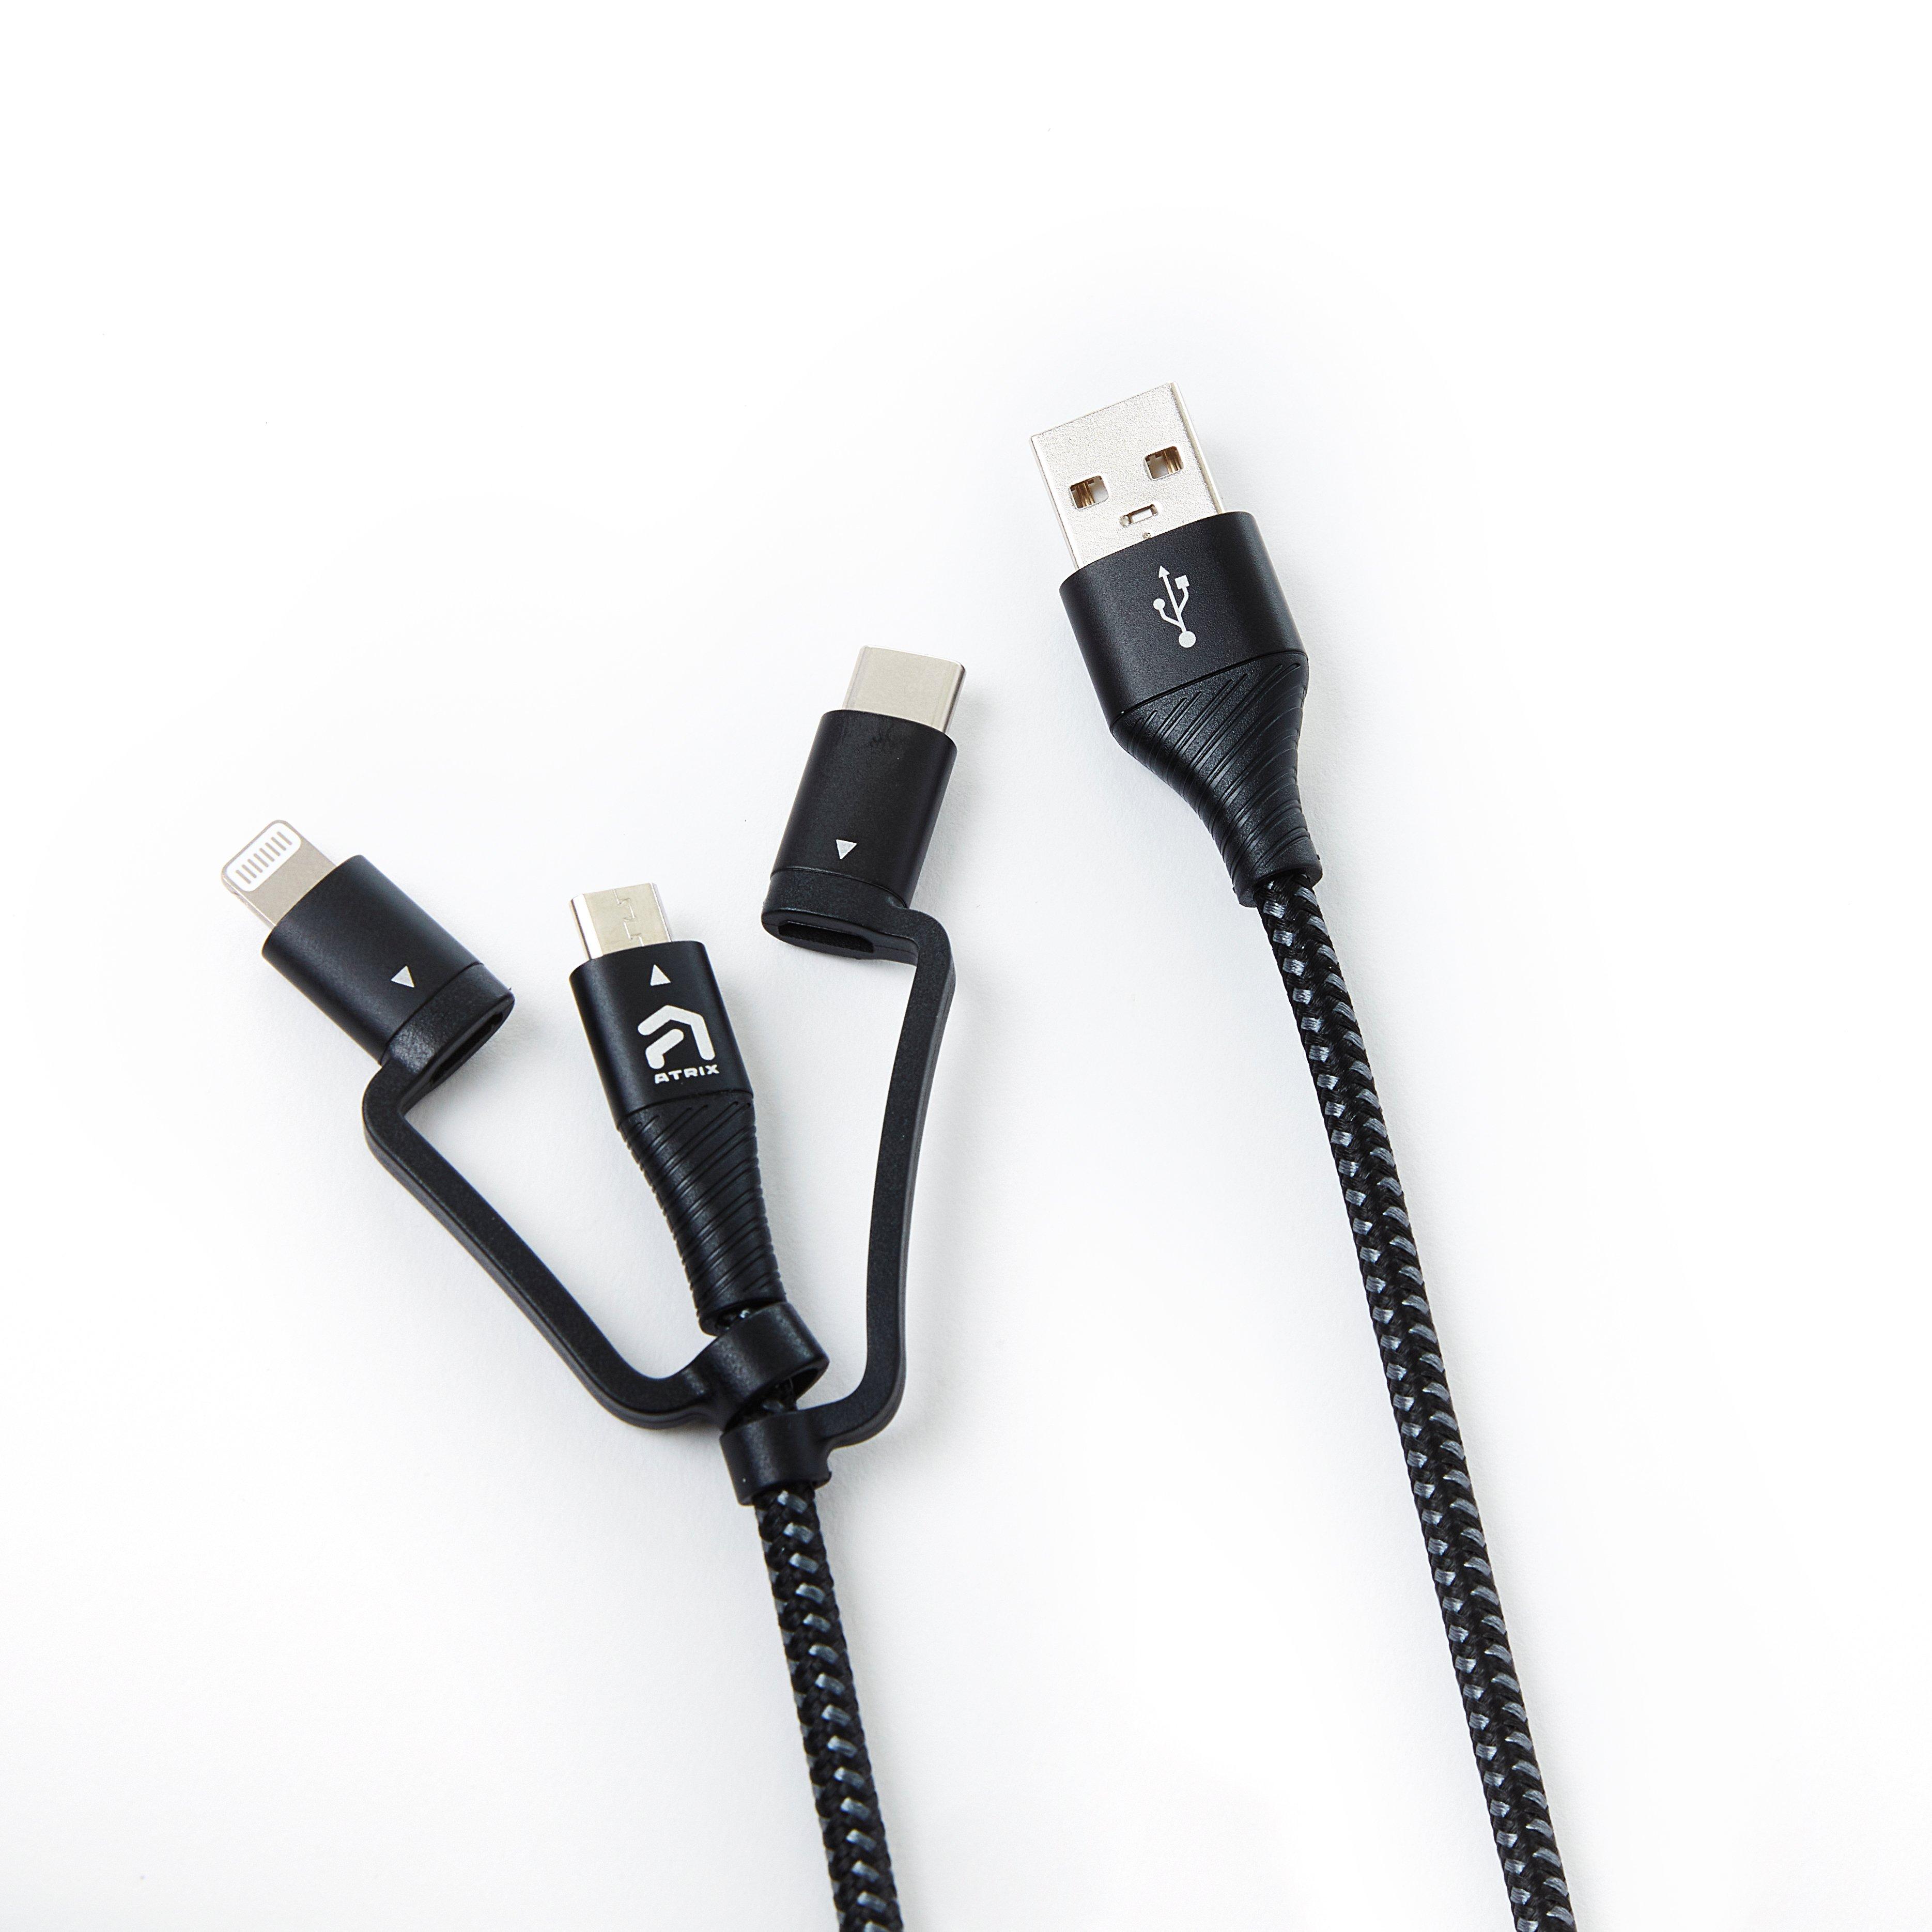 Tropical Pineapple Patternthe Square Three-in-One USB Cable is A Universal Interface Charging Cable Suitable for Various Mobile Phones and Tablets